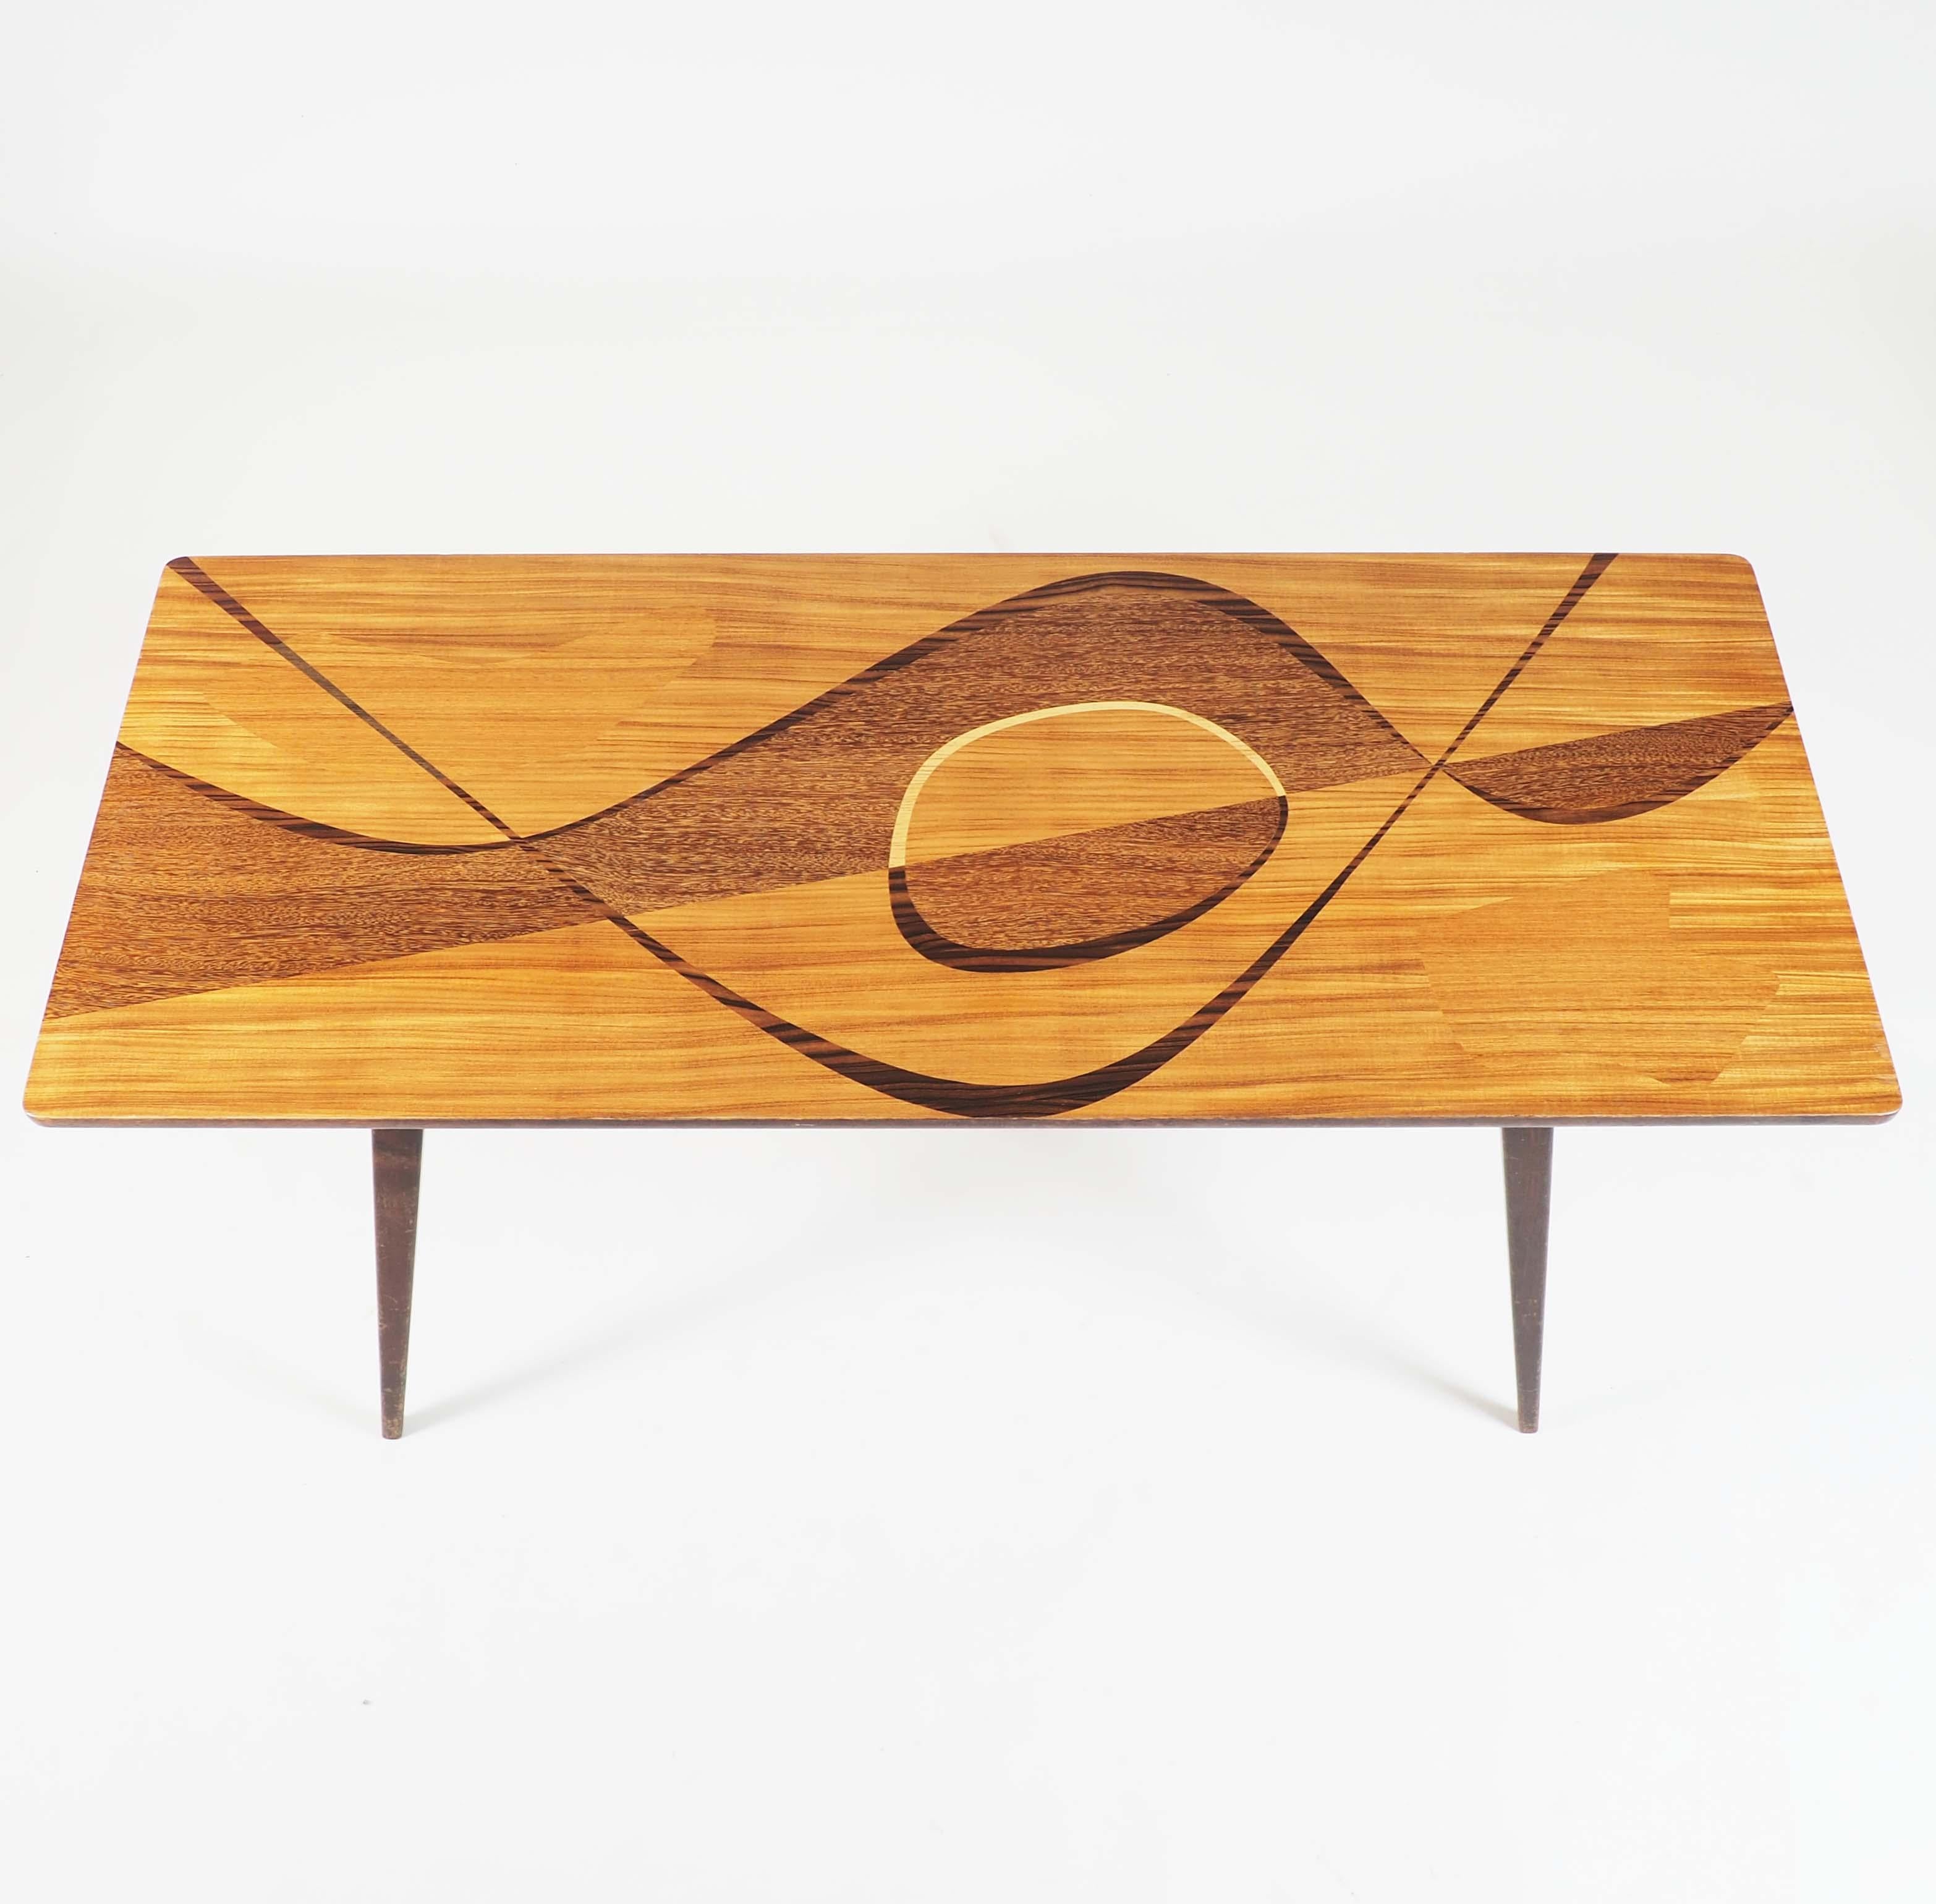 Swedish Coffee Table with Inlaid Wood from Sweden, 1950s For Sale